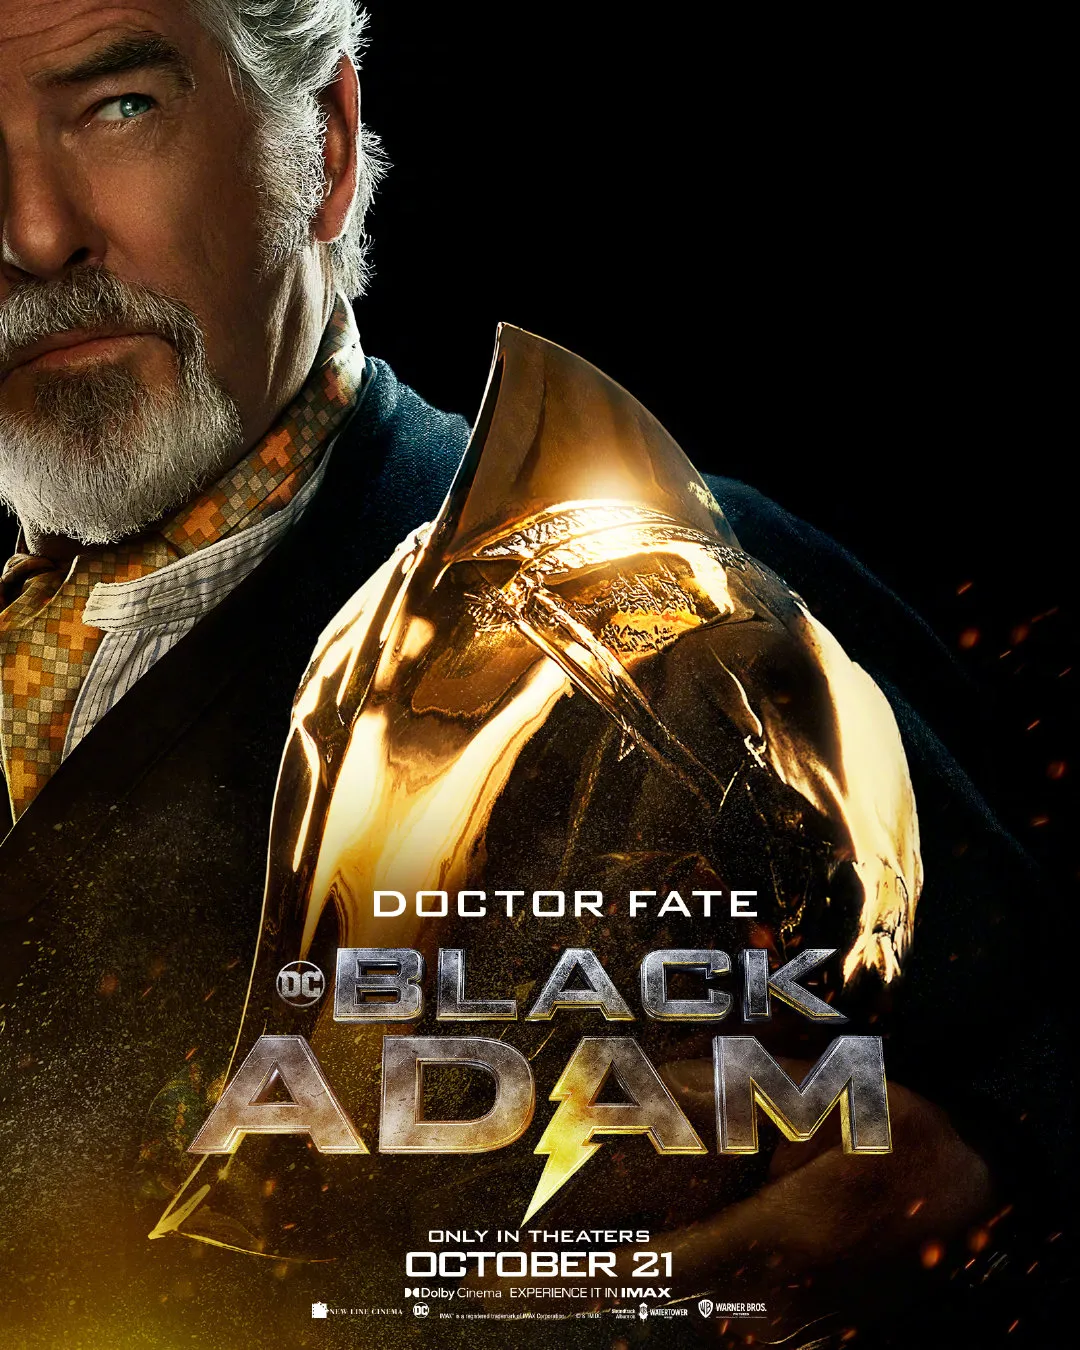 DC New Film 'Black Adam' Releases Official Posters and Character Posters | FMV6